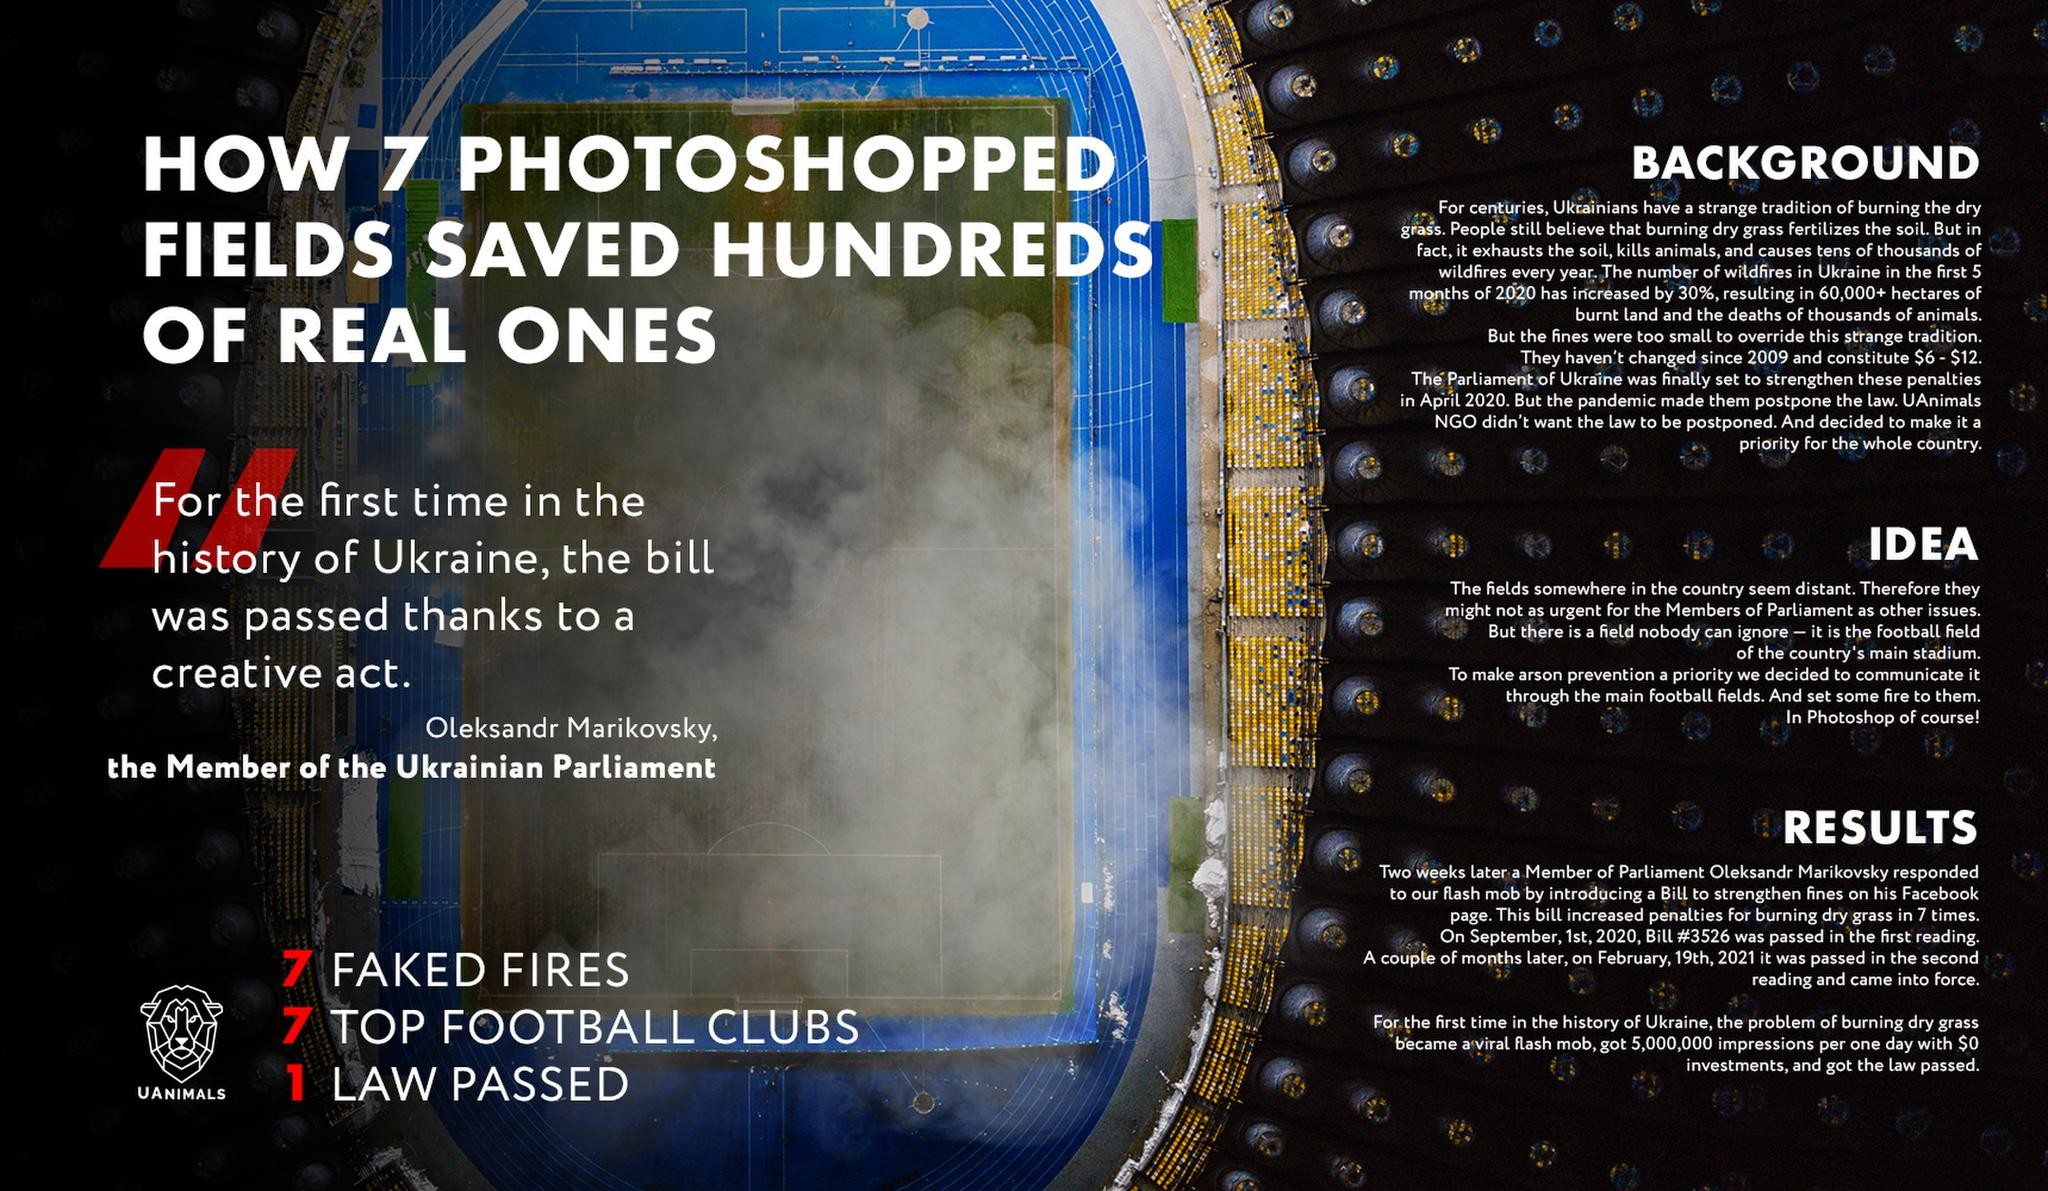 HOW 7 PHOTOSHOPPED FIELDS SAVED HUNDREDS OF REAL ONES